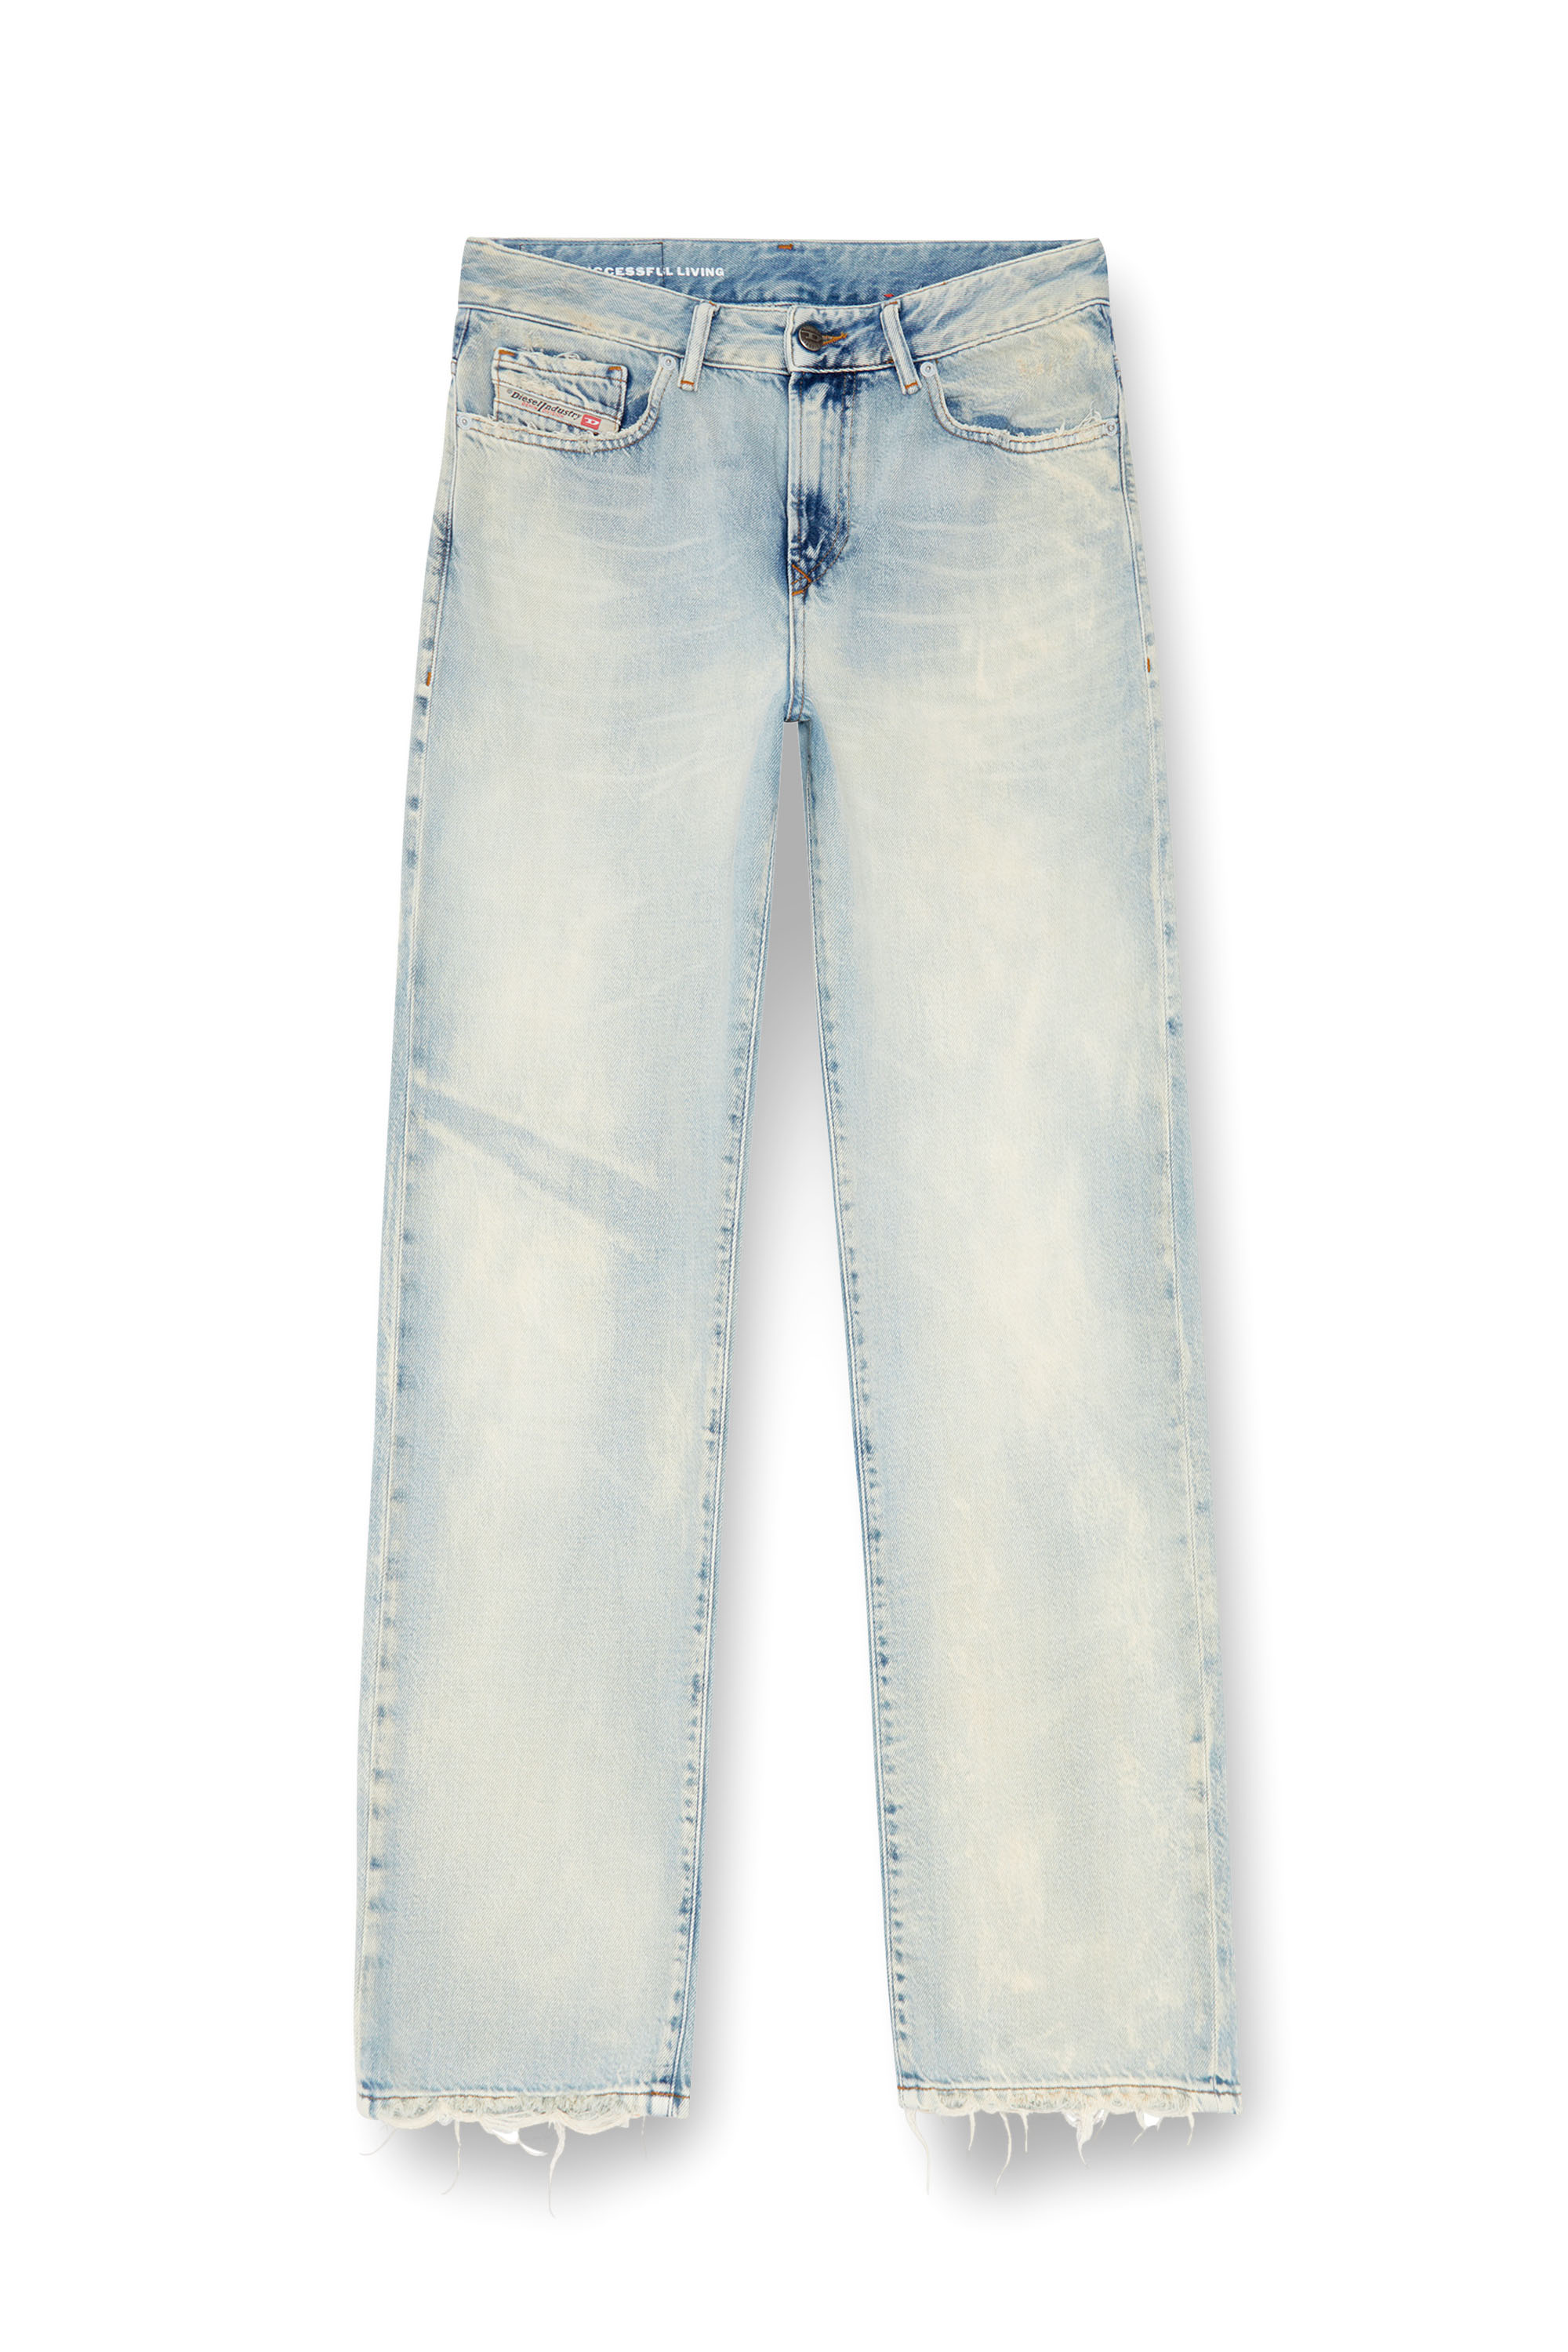 Diesel - Straight Jeans 1999 D-Reggy 09J89, Mujer Straight Jeans - 1999 D-Reggy in Azul marino - Image 5